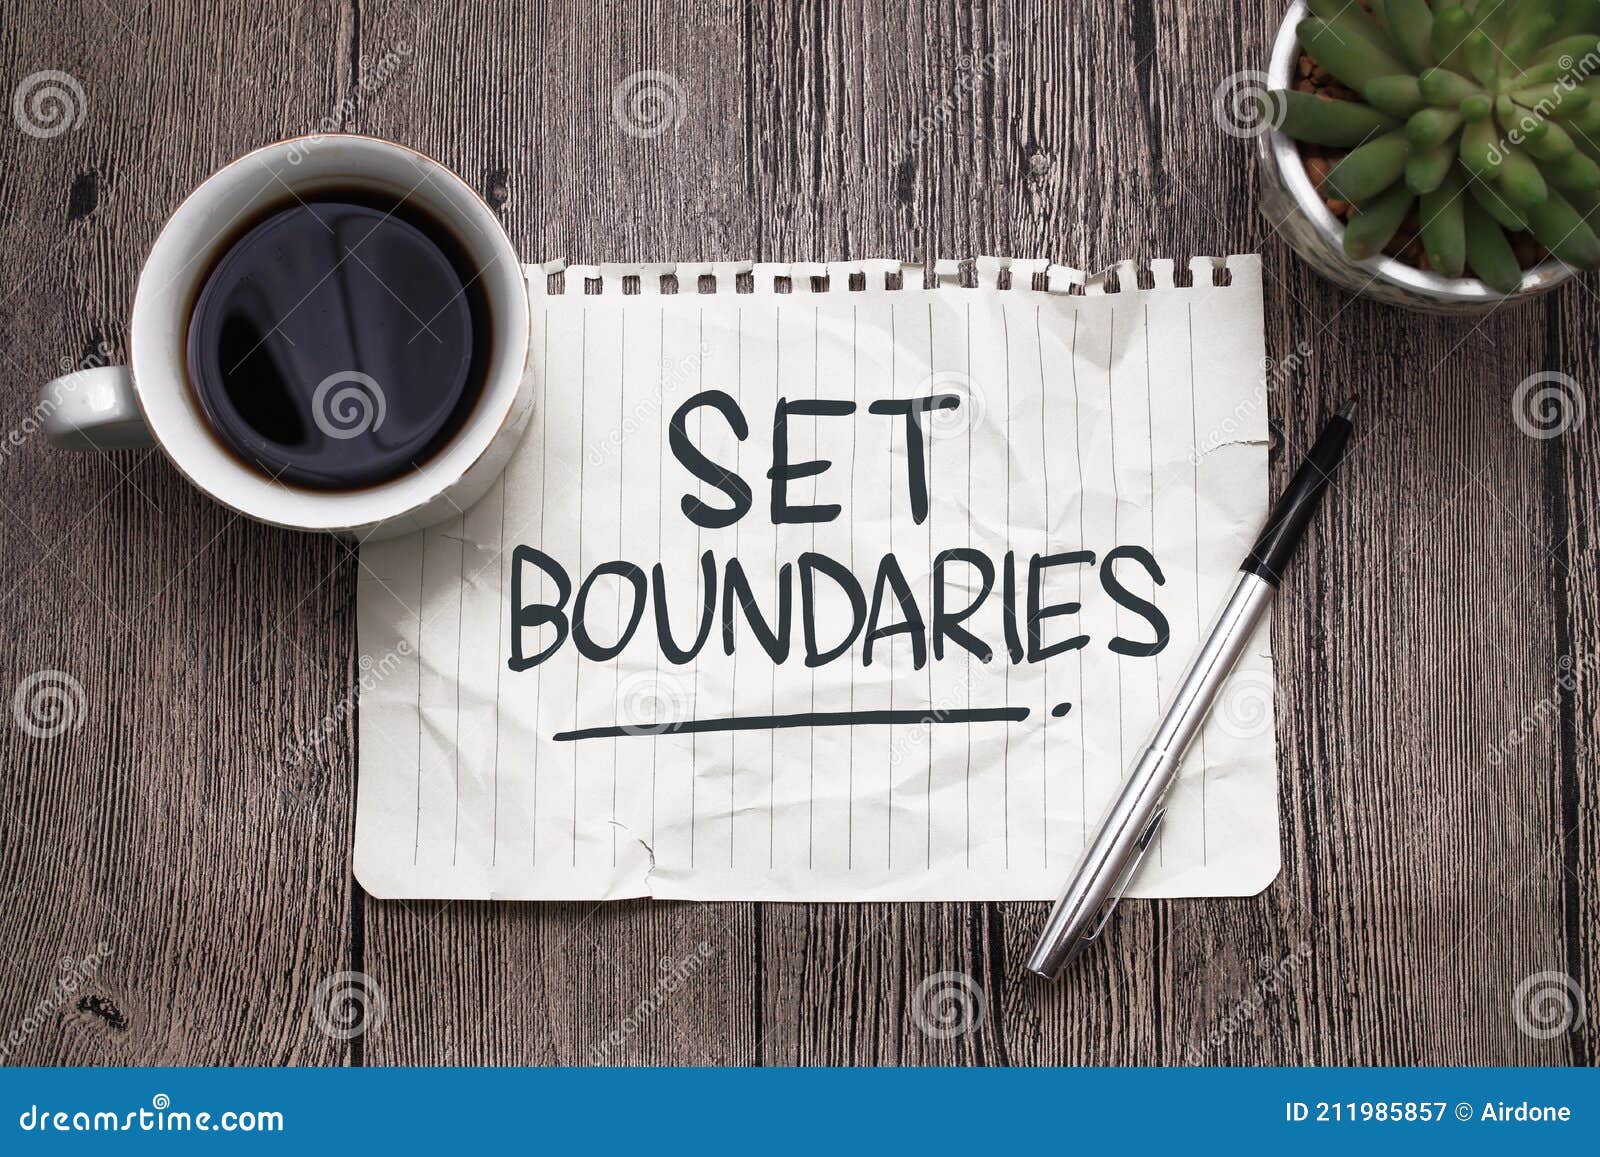 set boundaries, text words typography written on paper against wooden background, life and business motivational inspirational